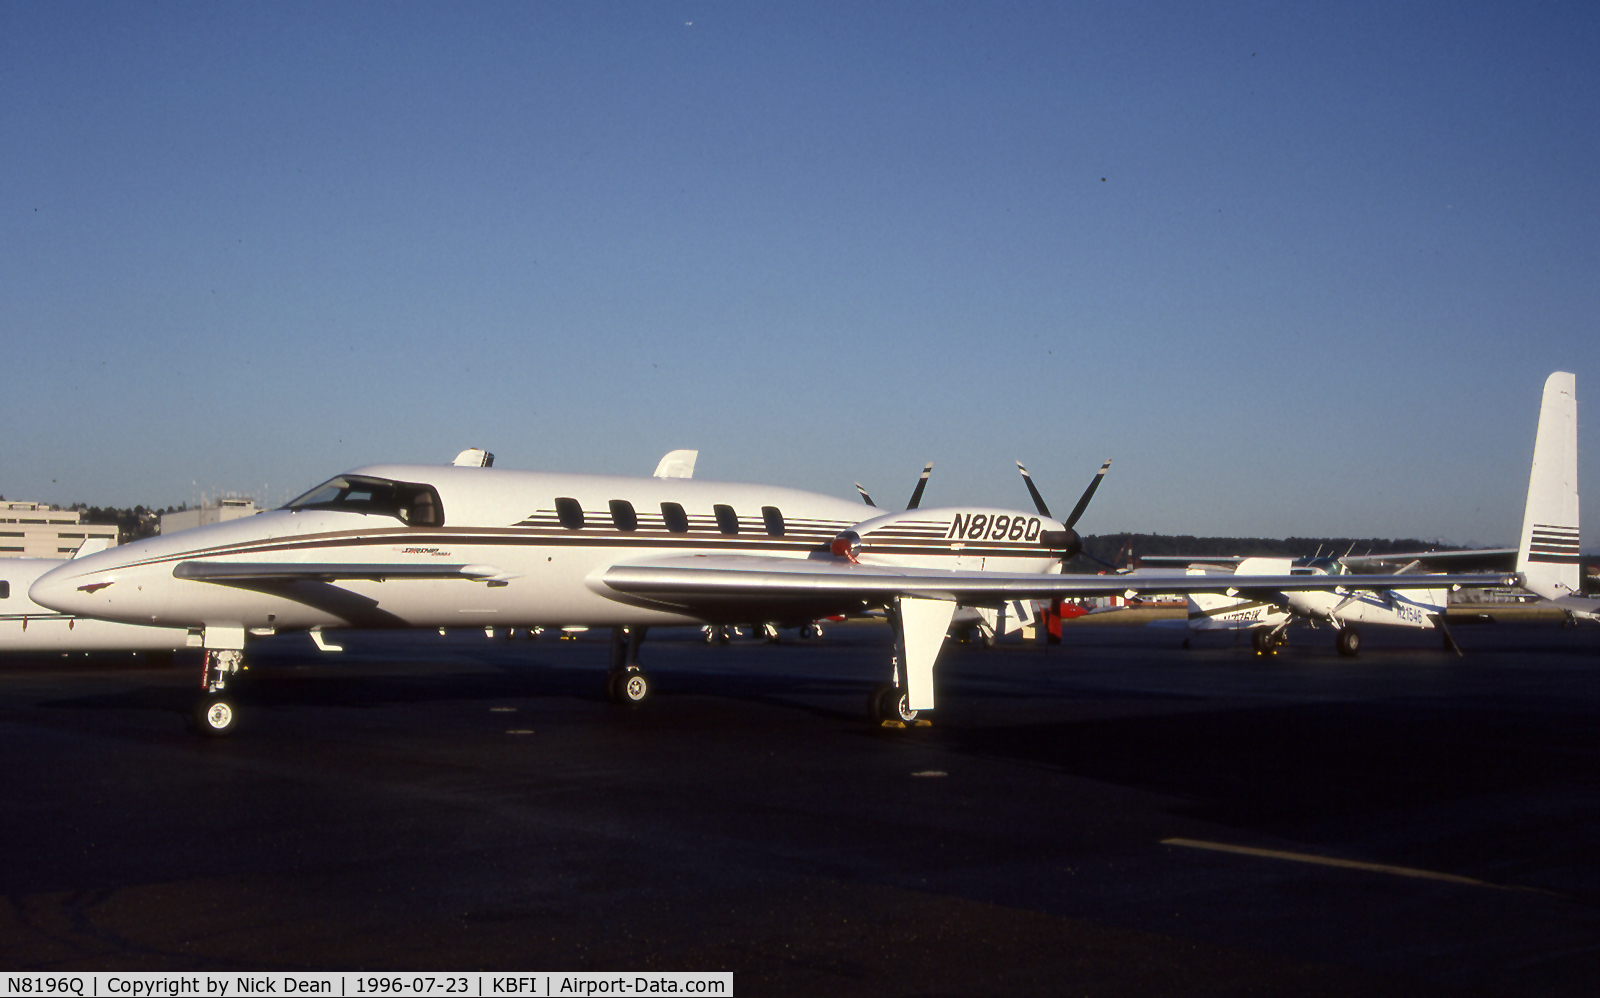 N8196Q, 1970 Cessna 414 Chancellor C/N 4140096, KBFI Starship C/N NC-48 N8196Q not as posted a C414 by the auto default